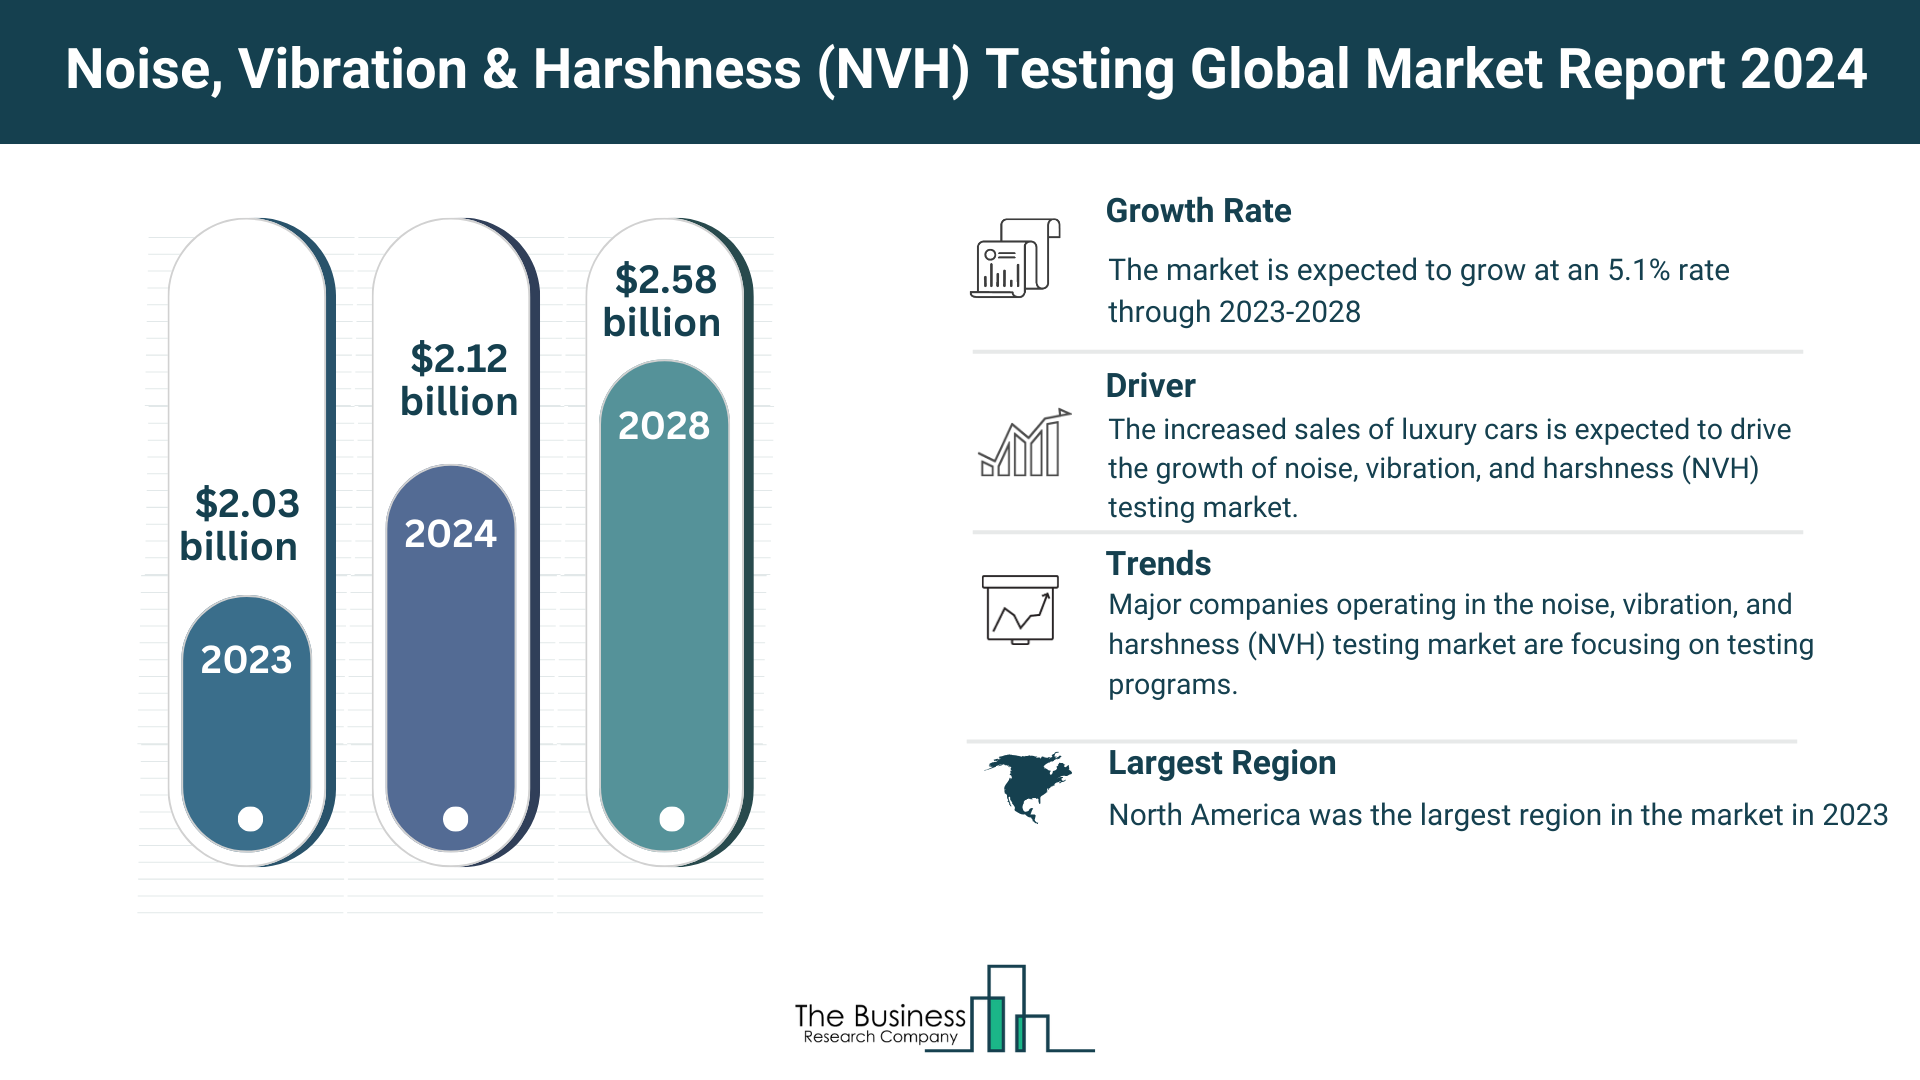 Global Noise, Vibration & Harshness (NVH) Testing Market Report 2024: Size, Drivers, And Top Segments